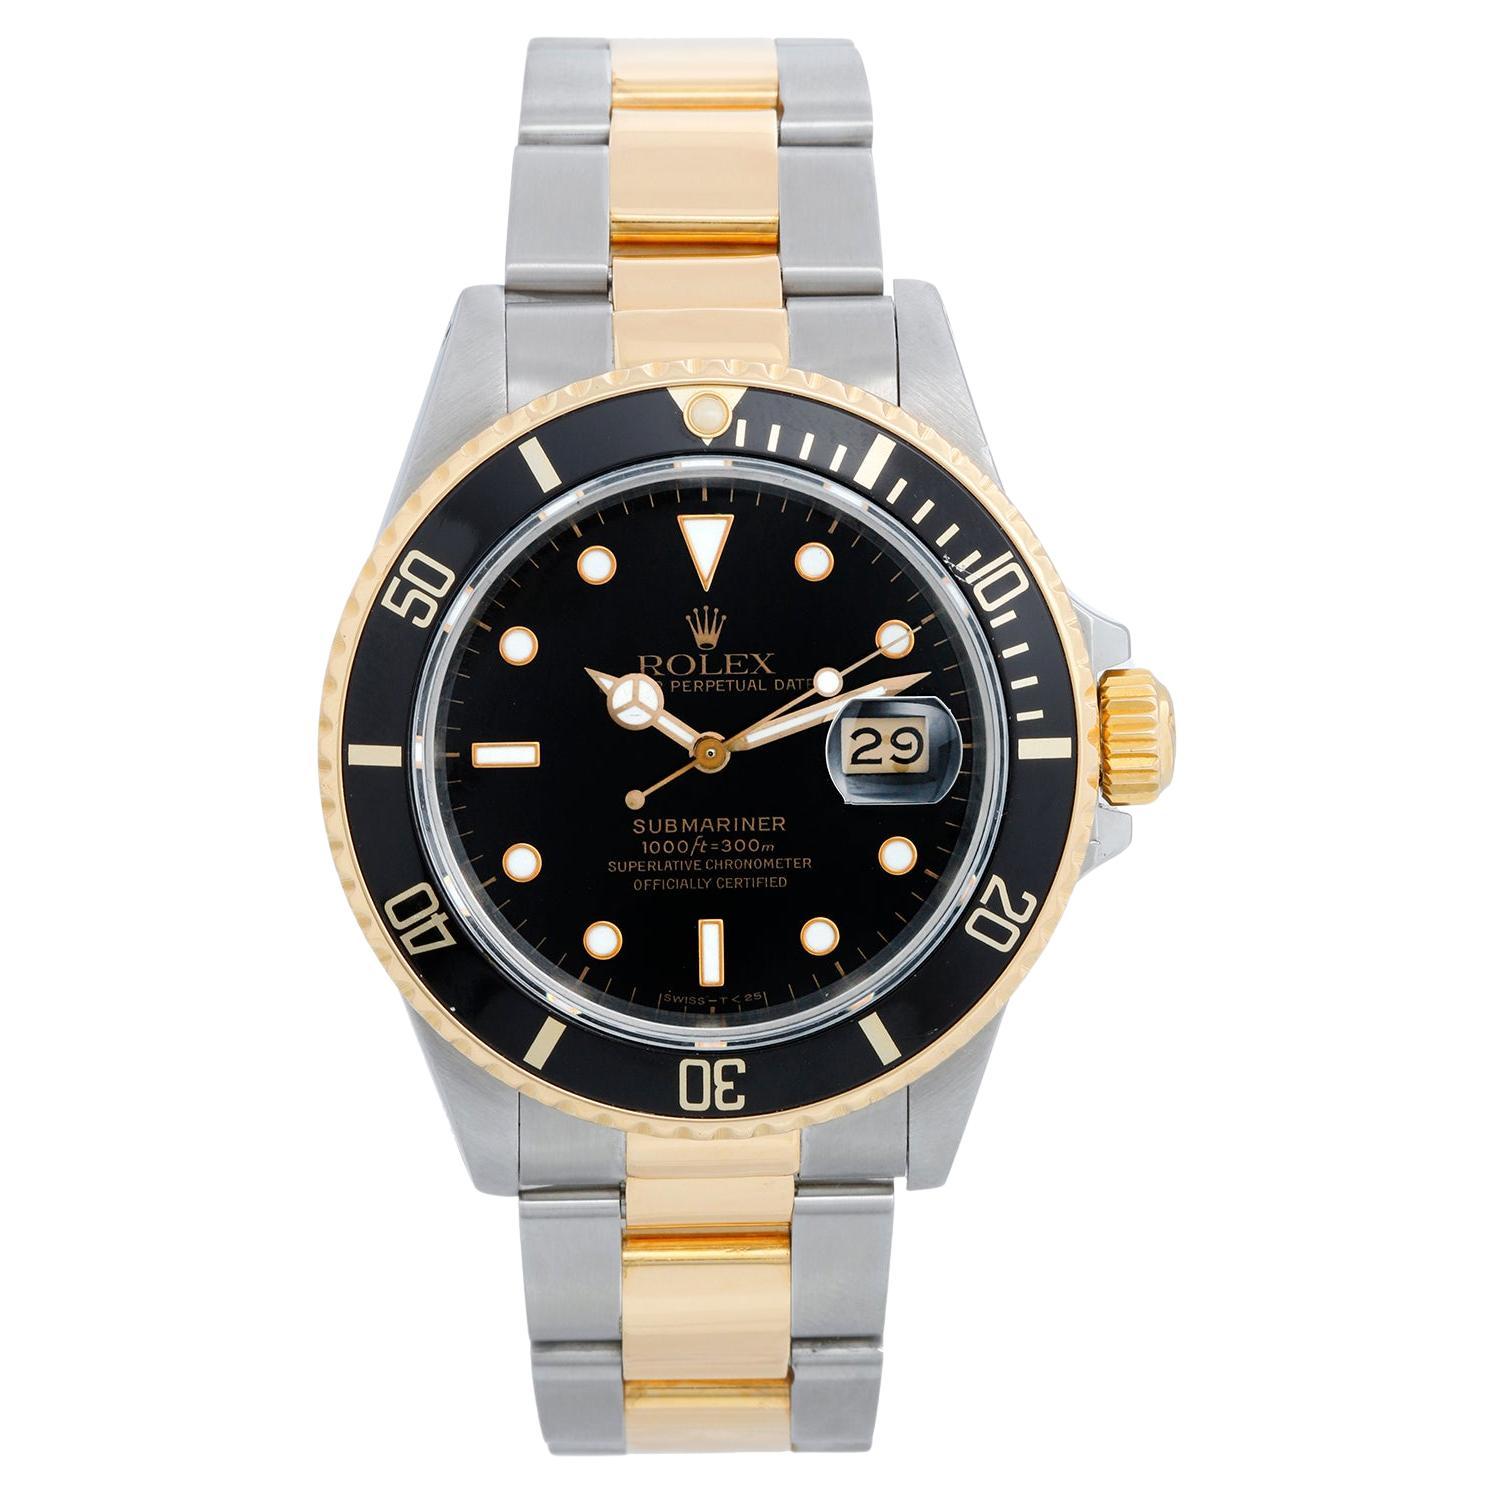 What is a two-tone Rolex?